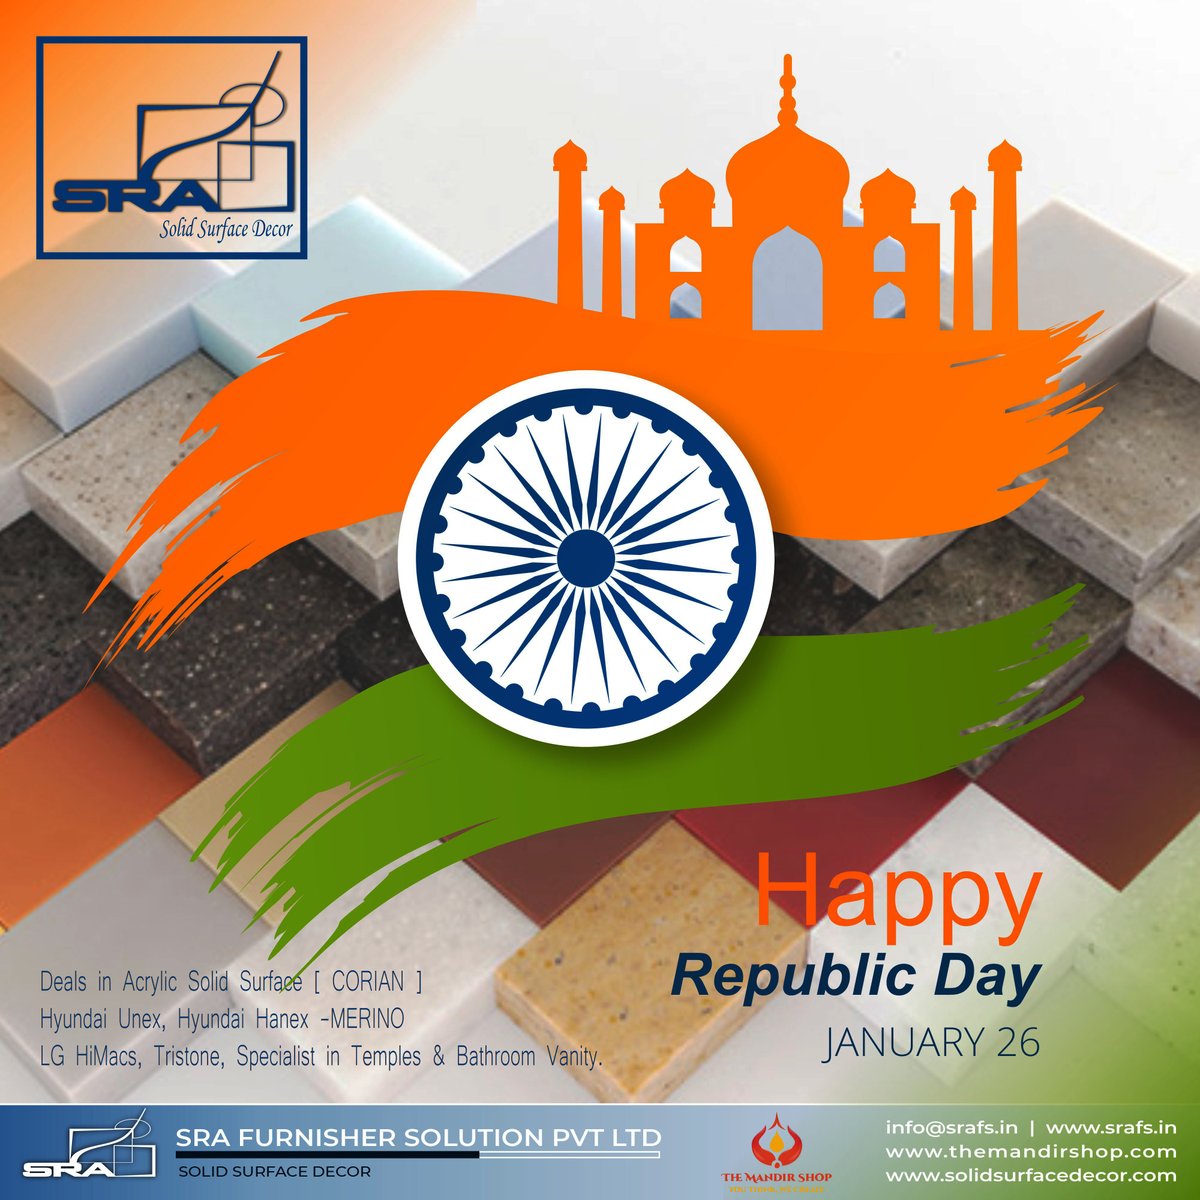 Let us remember the golden heritage of our country and feel proud to be a part of India. Happy Republic Day

#mandir #templedesign #templedecor #templeidea #TempleForHome #coriandesign #coriantemple #AcrylicSolidSurface #AcrylicSolidSurfaceTemple #smalltemple #HANEX #himacs